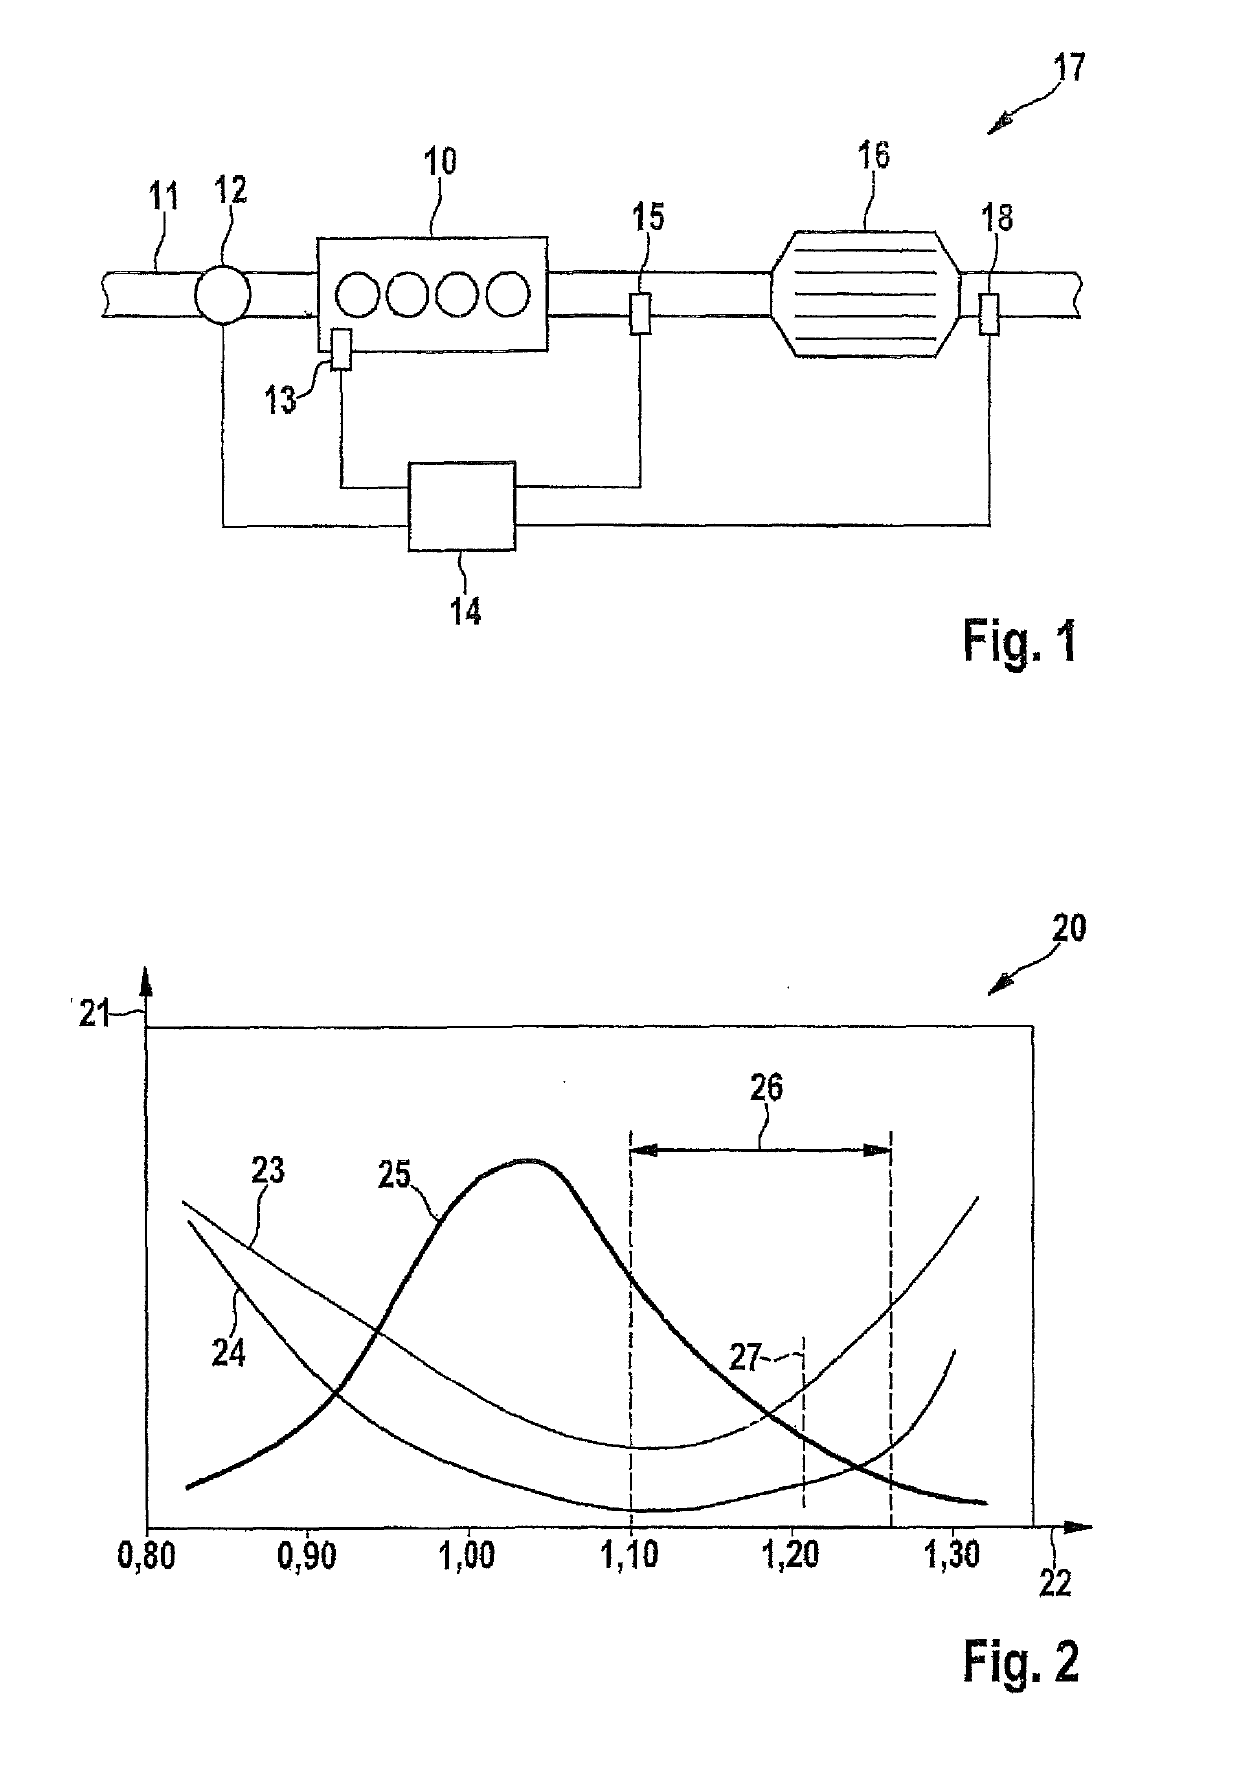 Method and device for reducing the emissions of an internal combustion engine